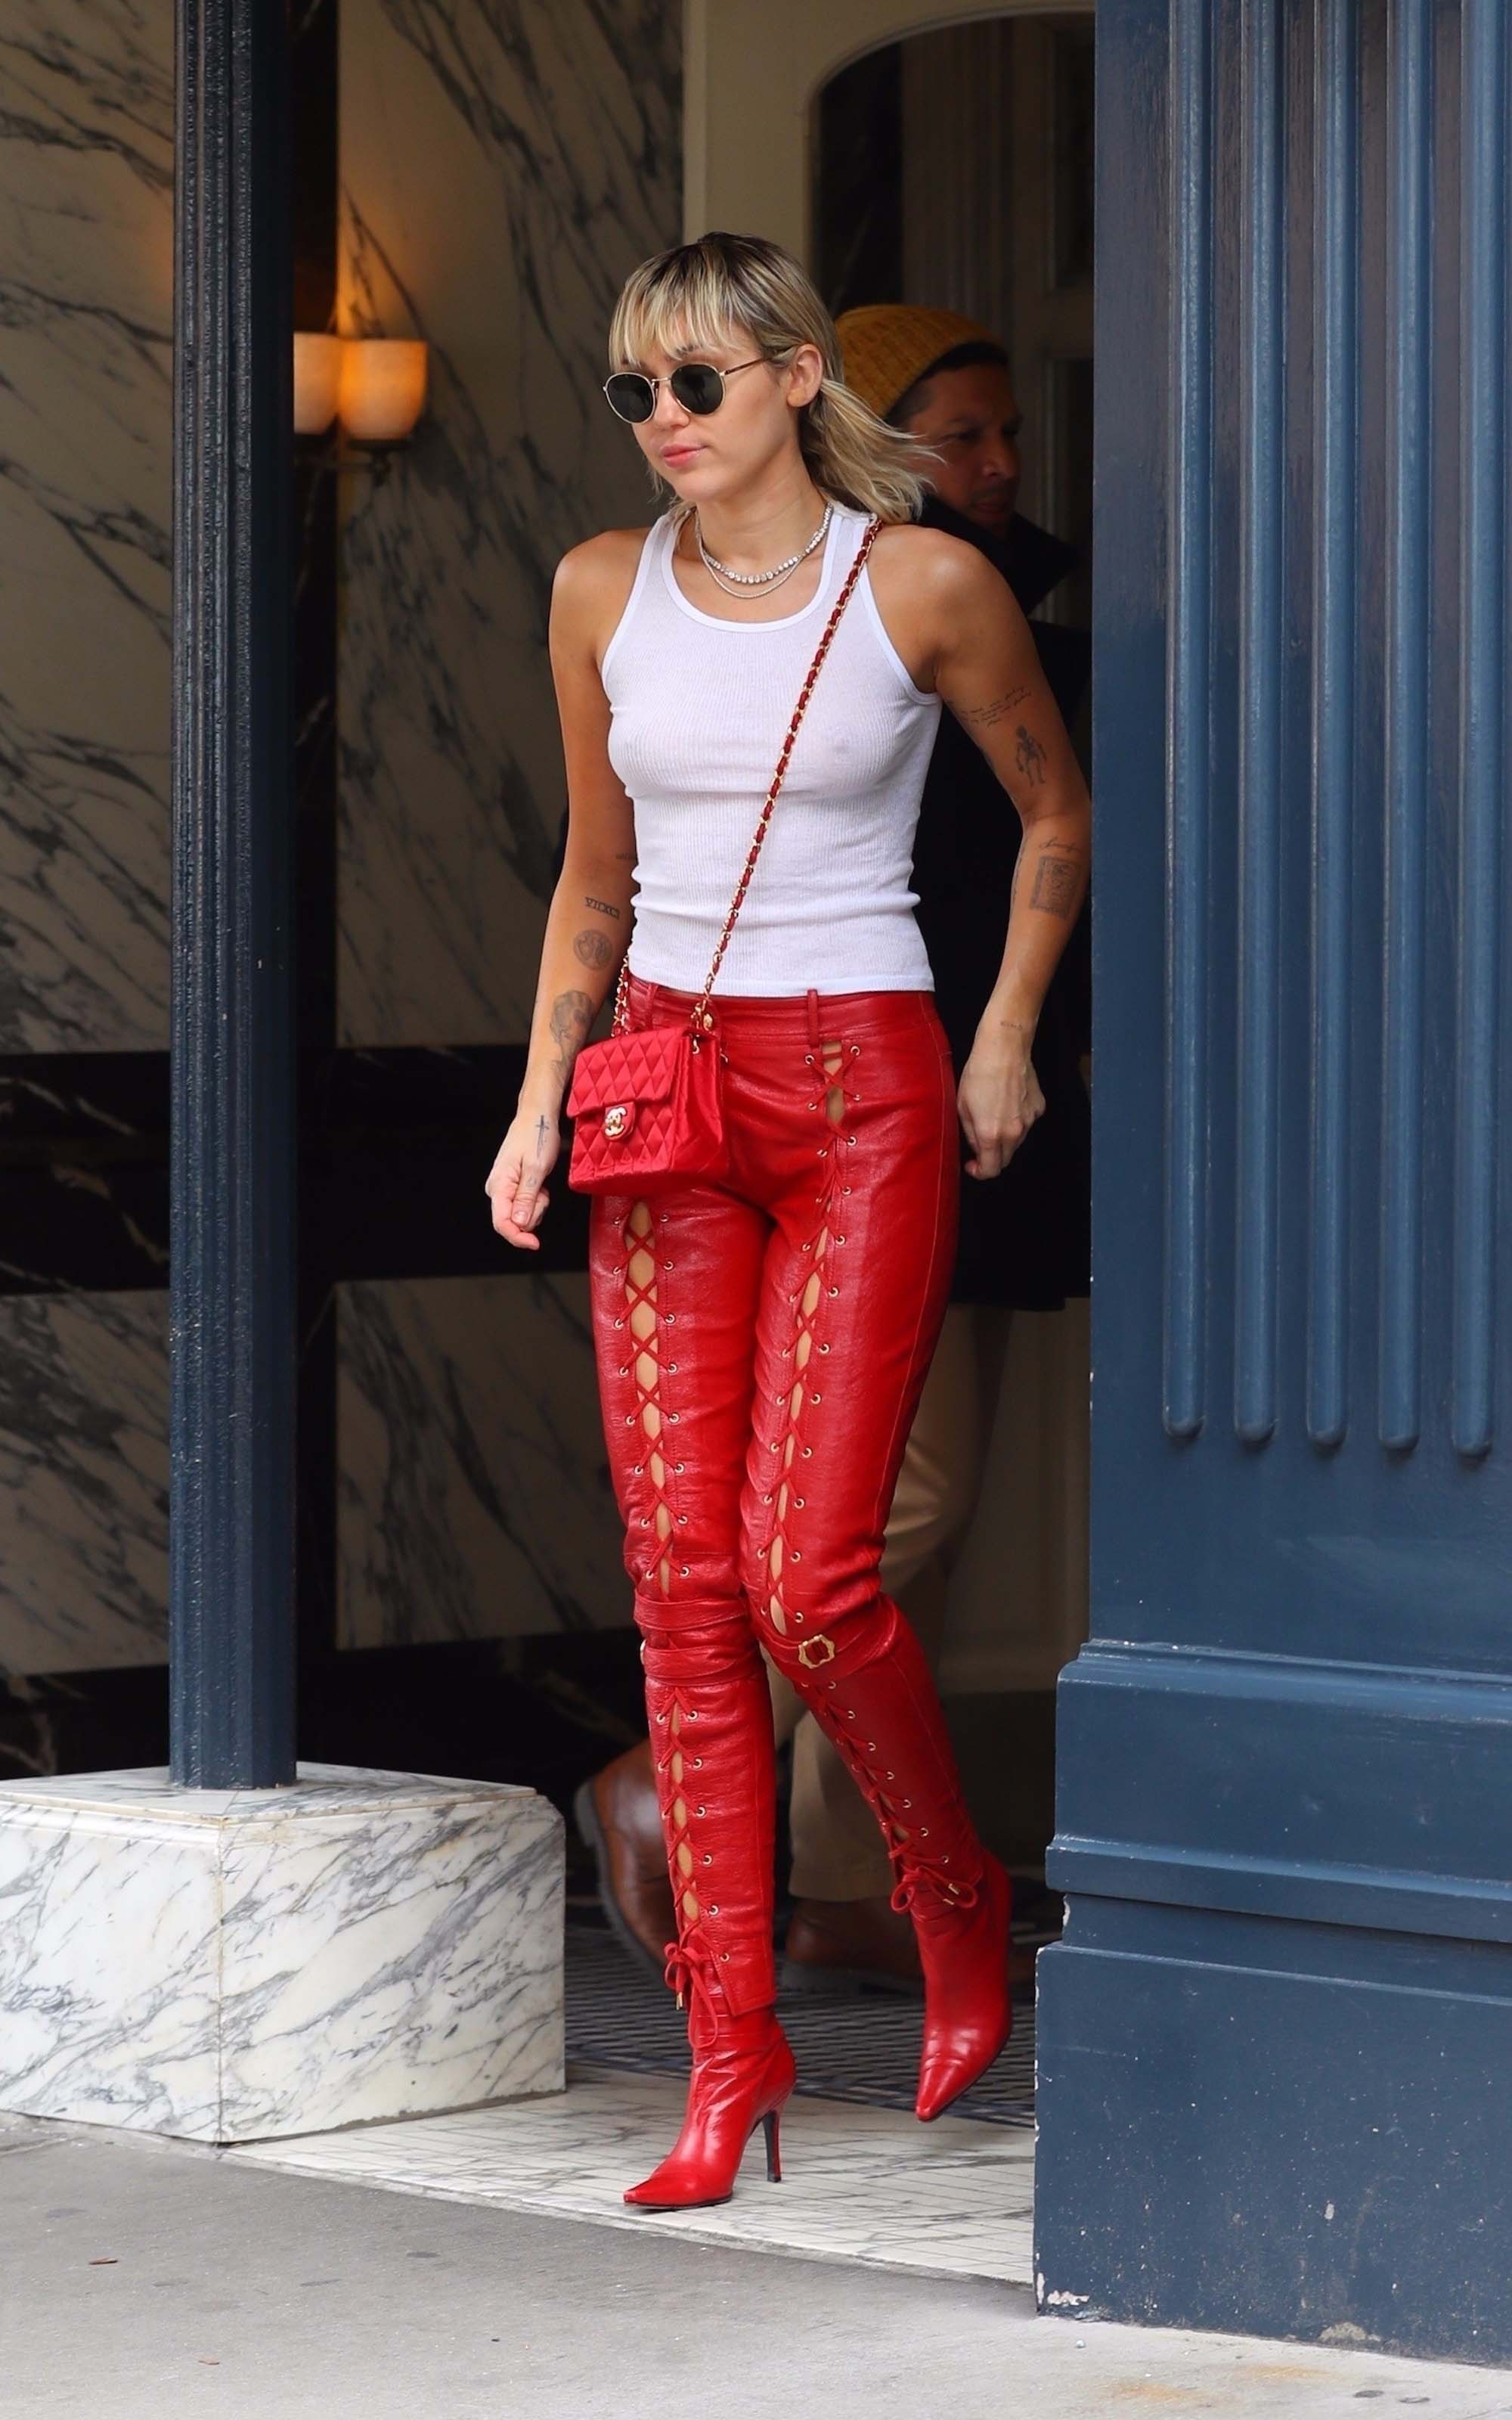 Miley Cyrus out in NYC